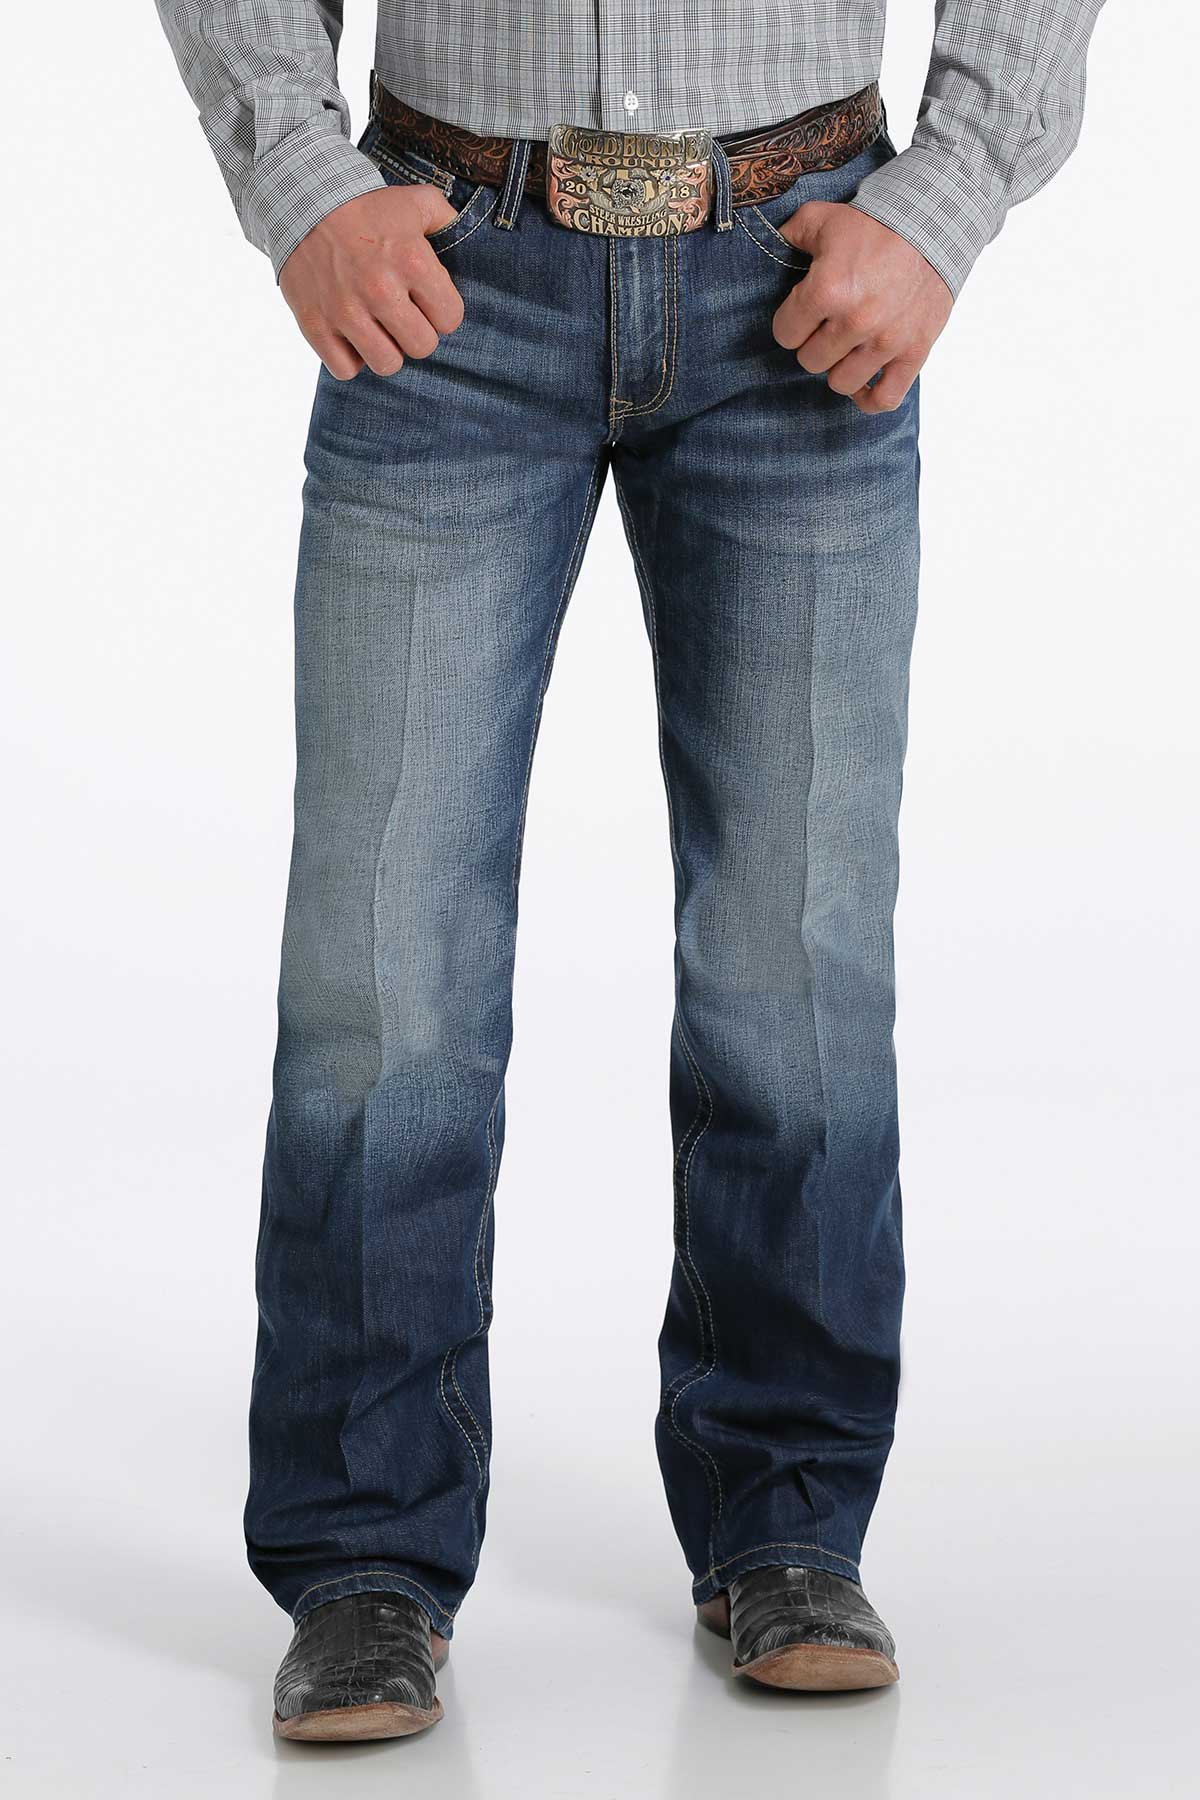 CINCH MEN'S RELAXED FIT GRANT - DARK STONE